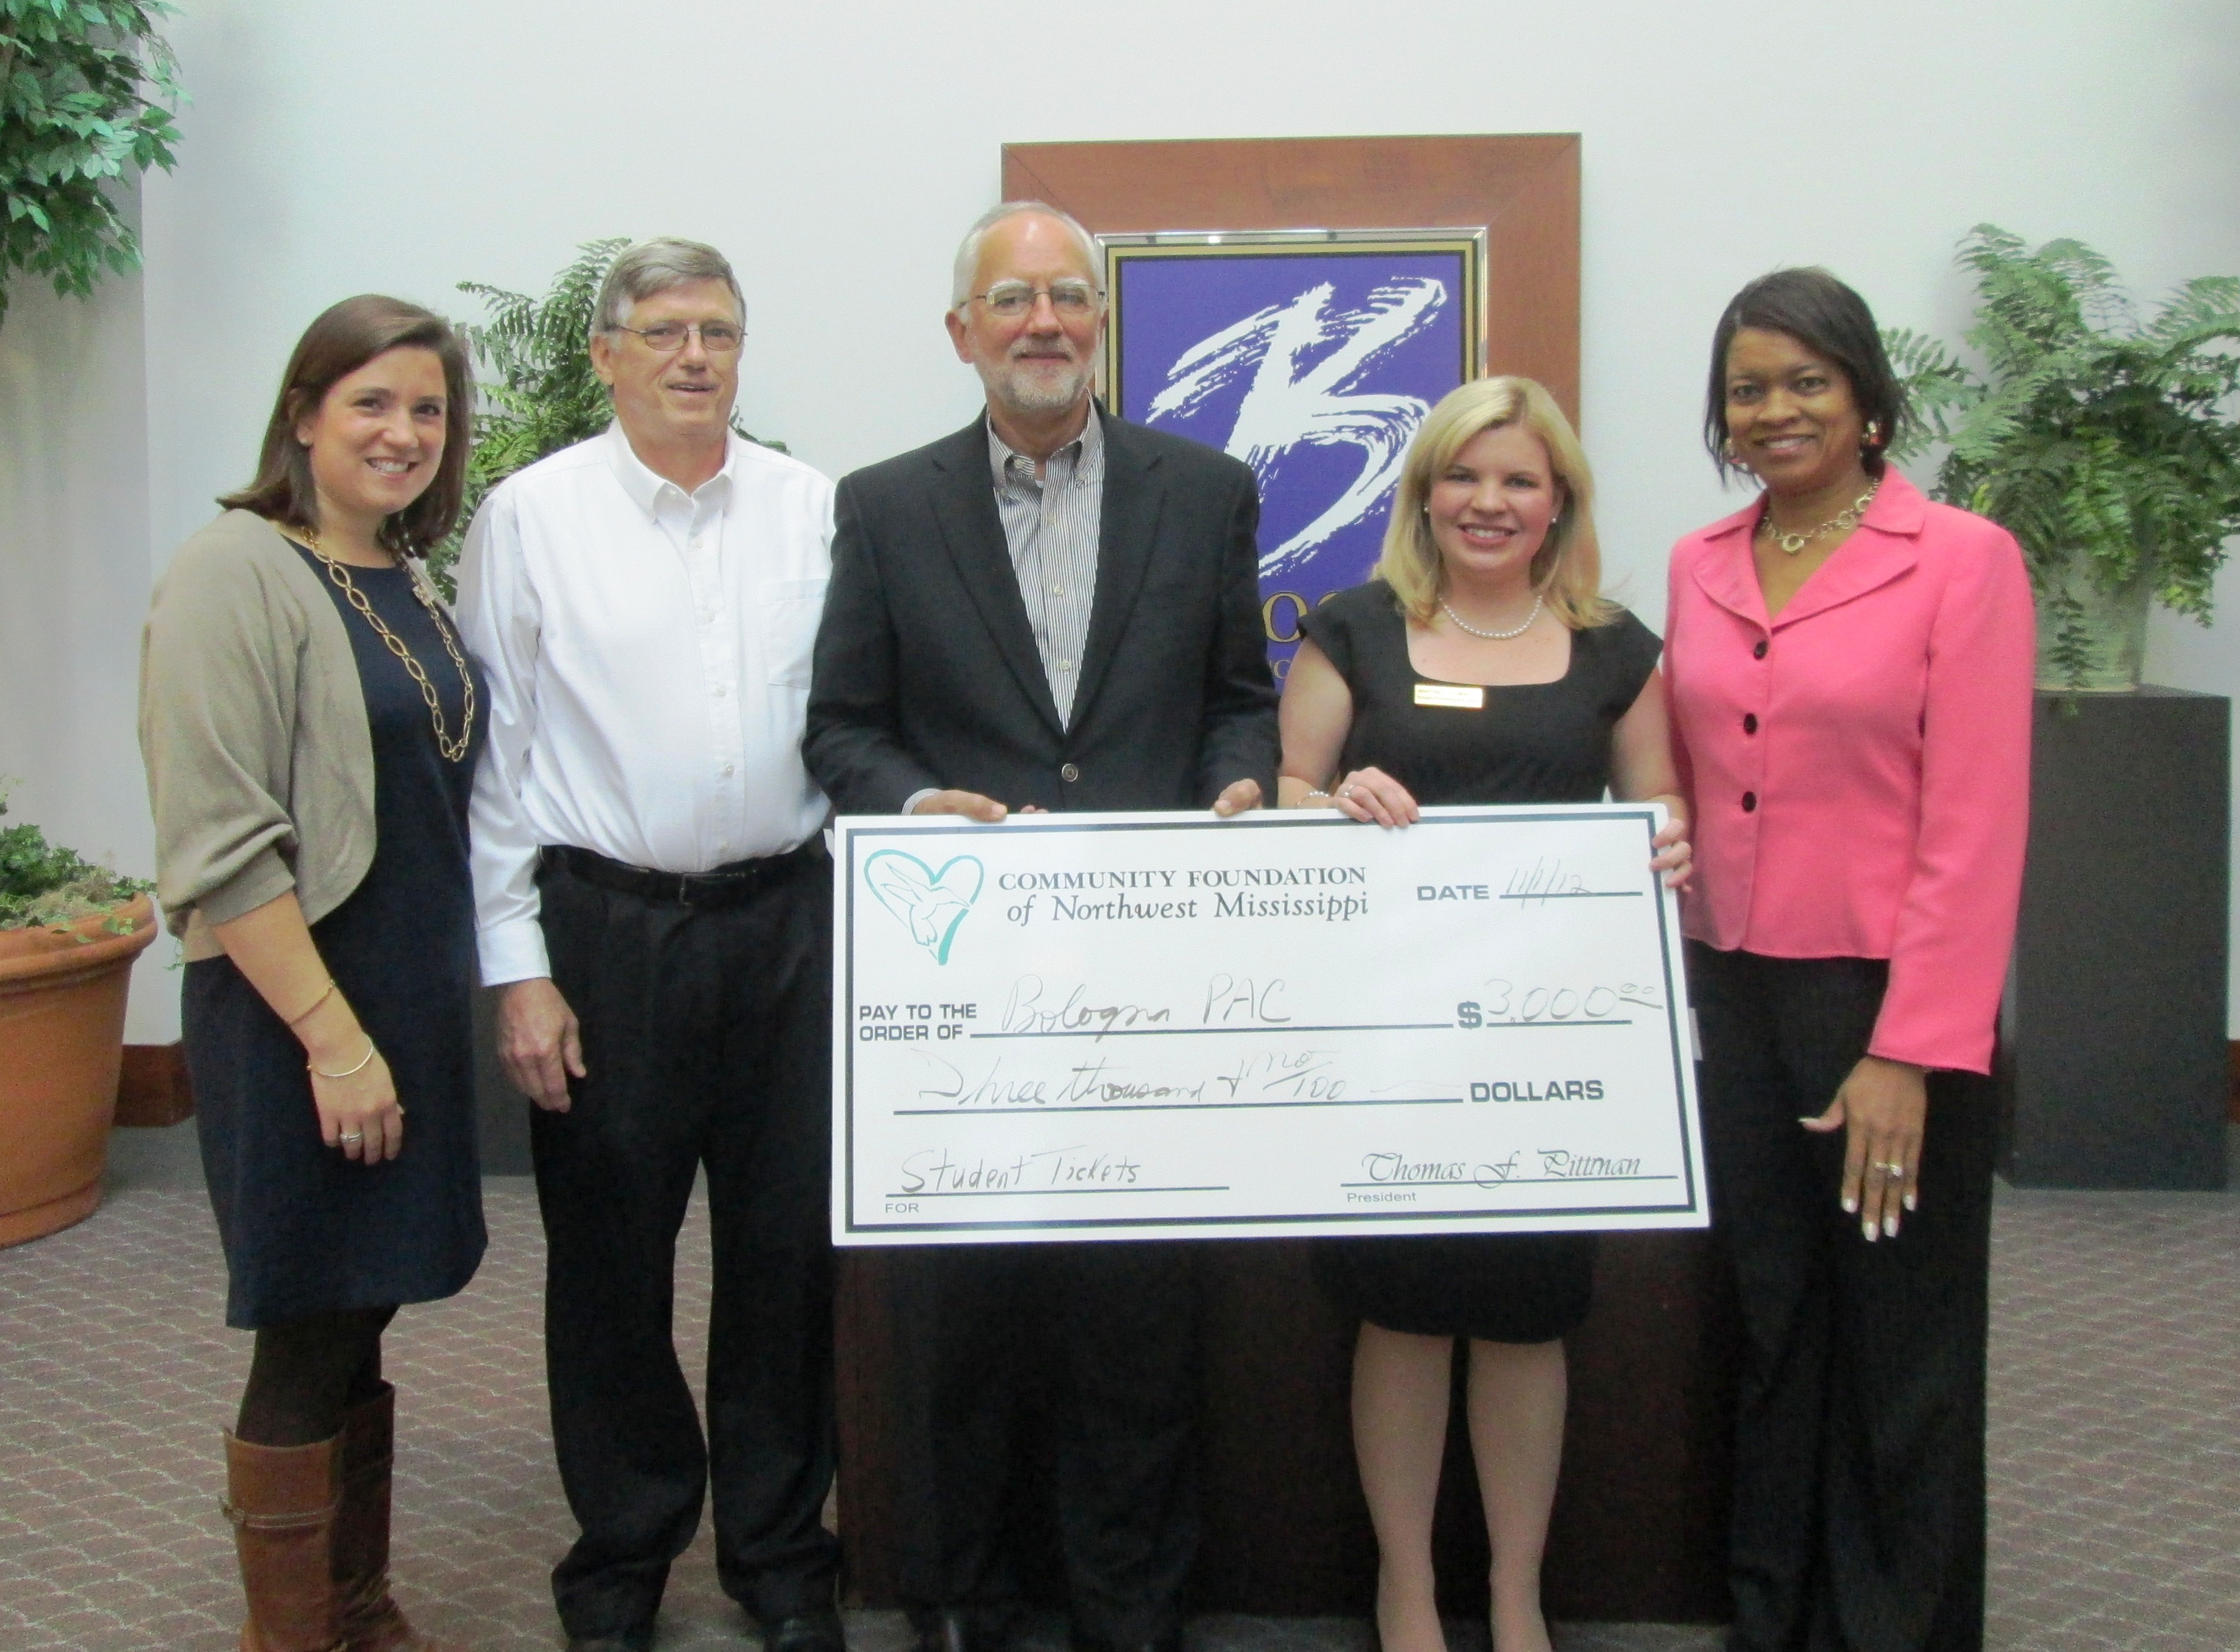 Photo: Laura Howell, BPAC Interim Executive Director, Whitney Cummins, BPAC Interim Arts Education Coordinator, and BPAC Arts Advisory Board Members Ron Koehler and Myra Boone accept the Place-Based Education Endowment from Tom Pittman, president of the Community Foundation of Northwest Mississippi.